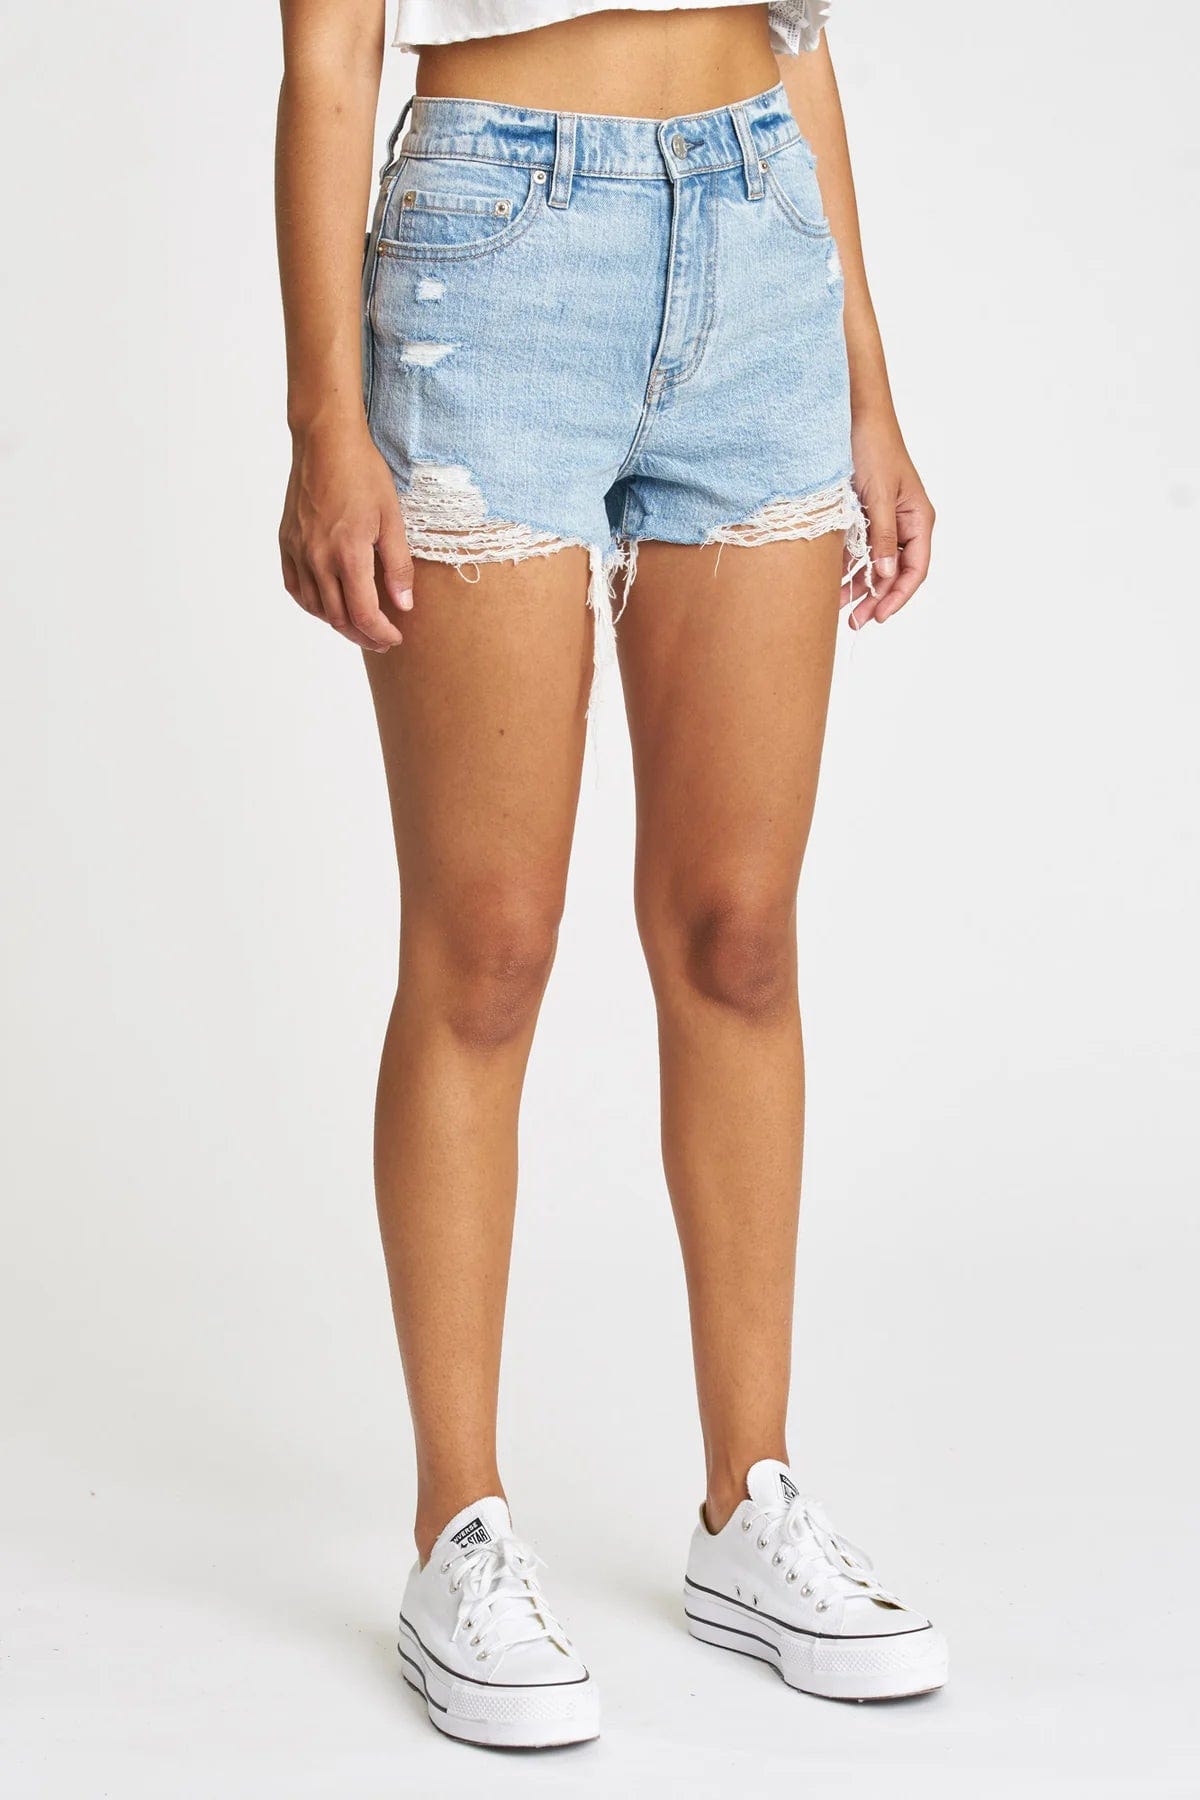 DAZE Troublemaker High Rise Denim Short in Just Kissed - Shorts - Blooming Daily